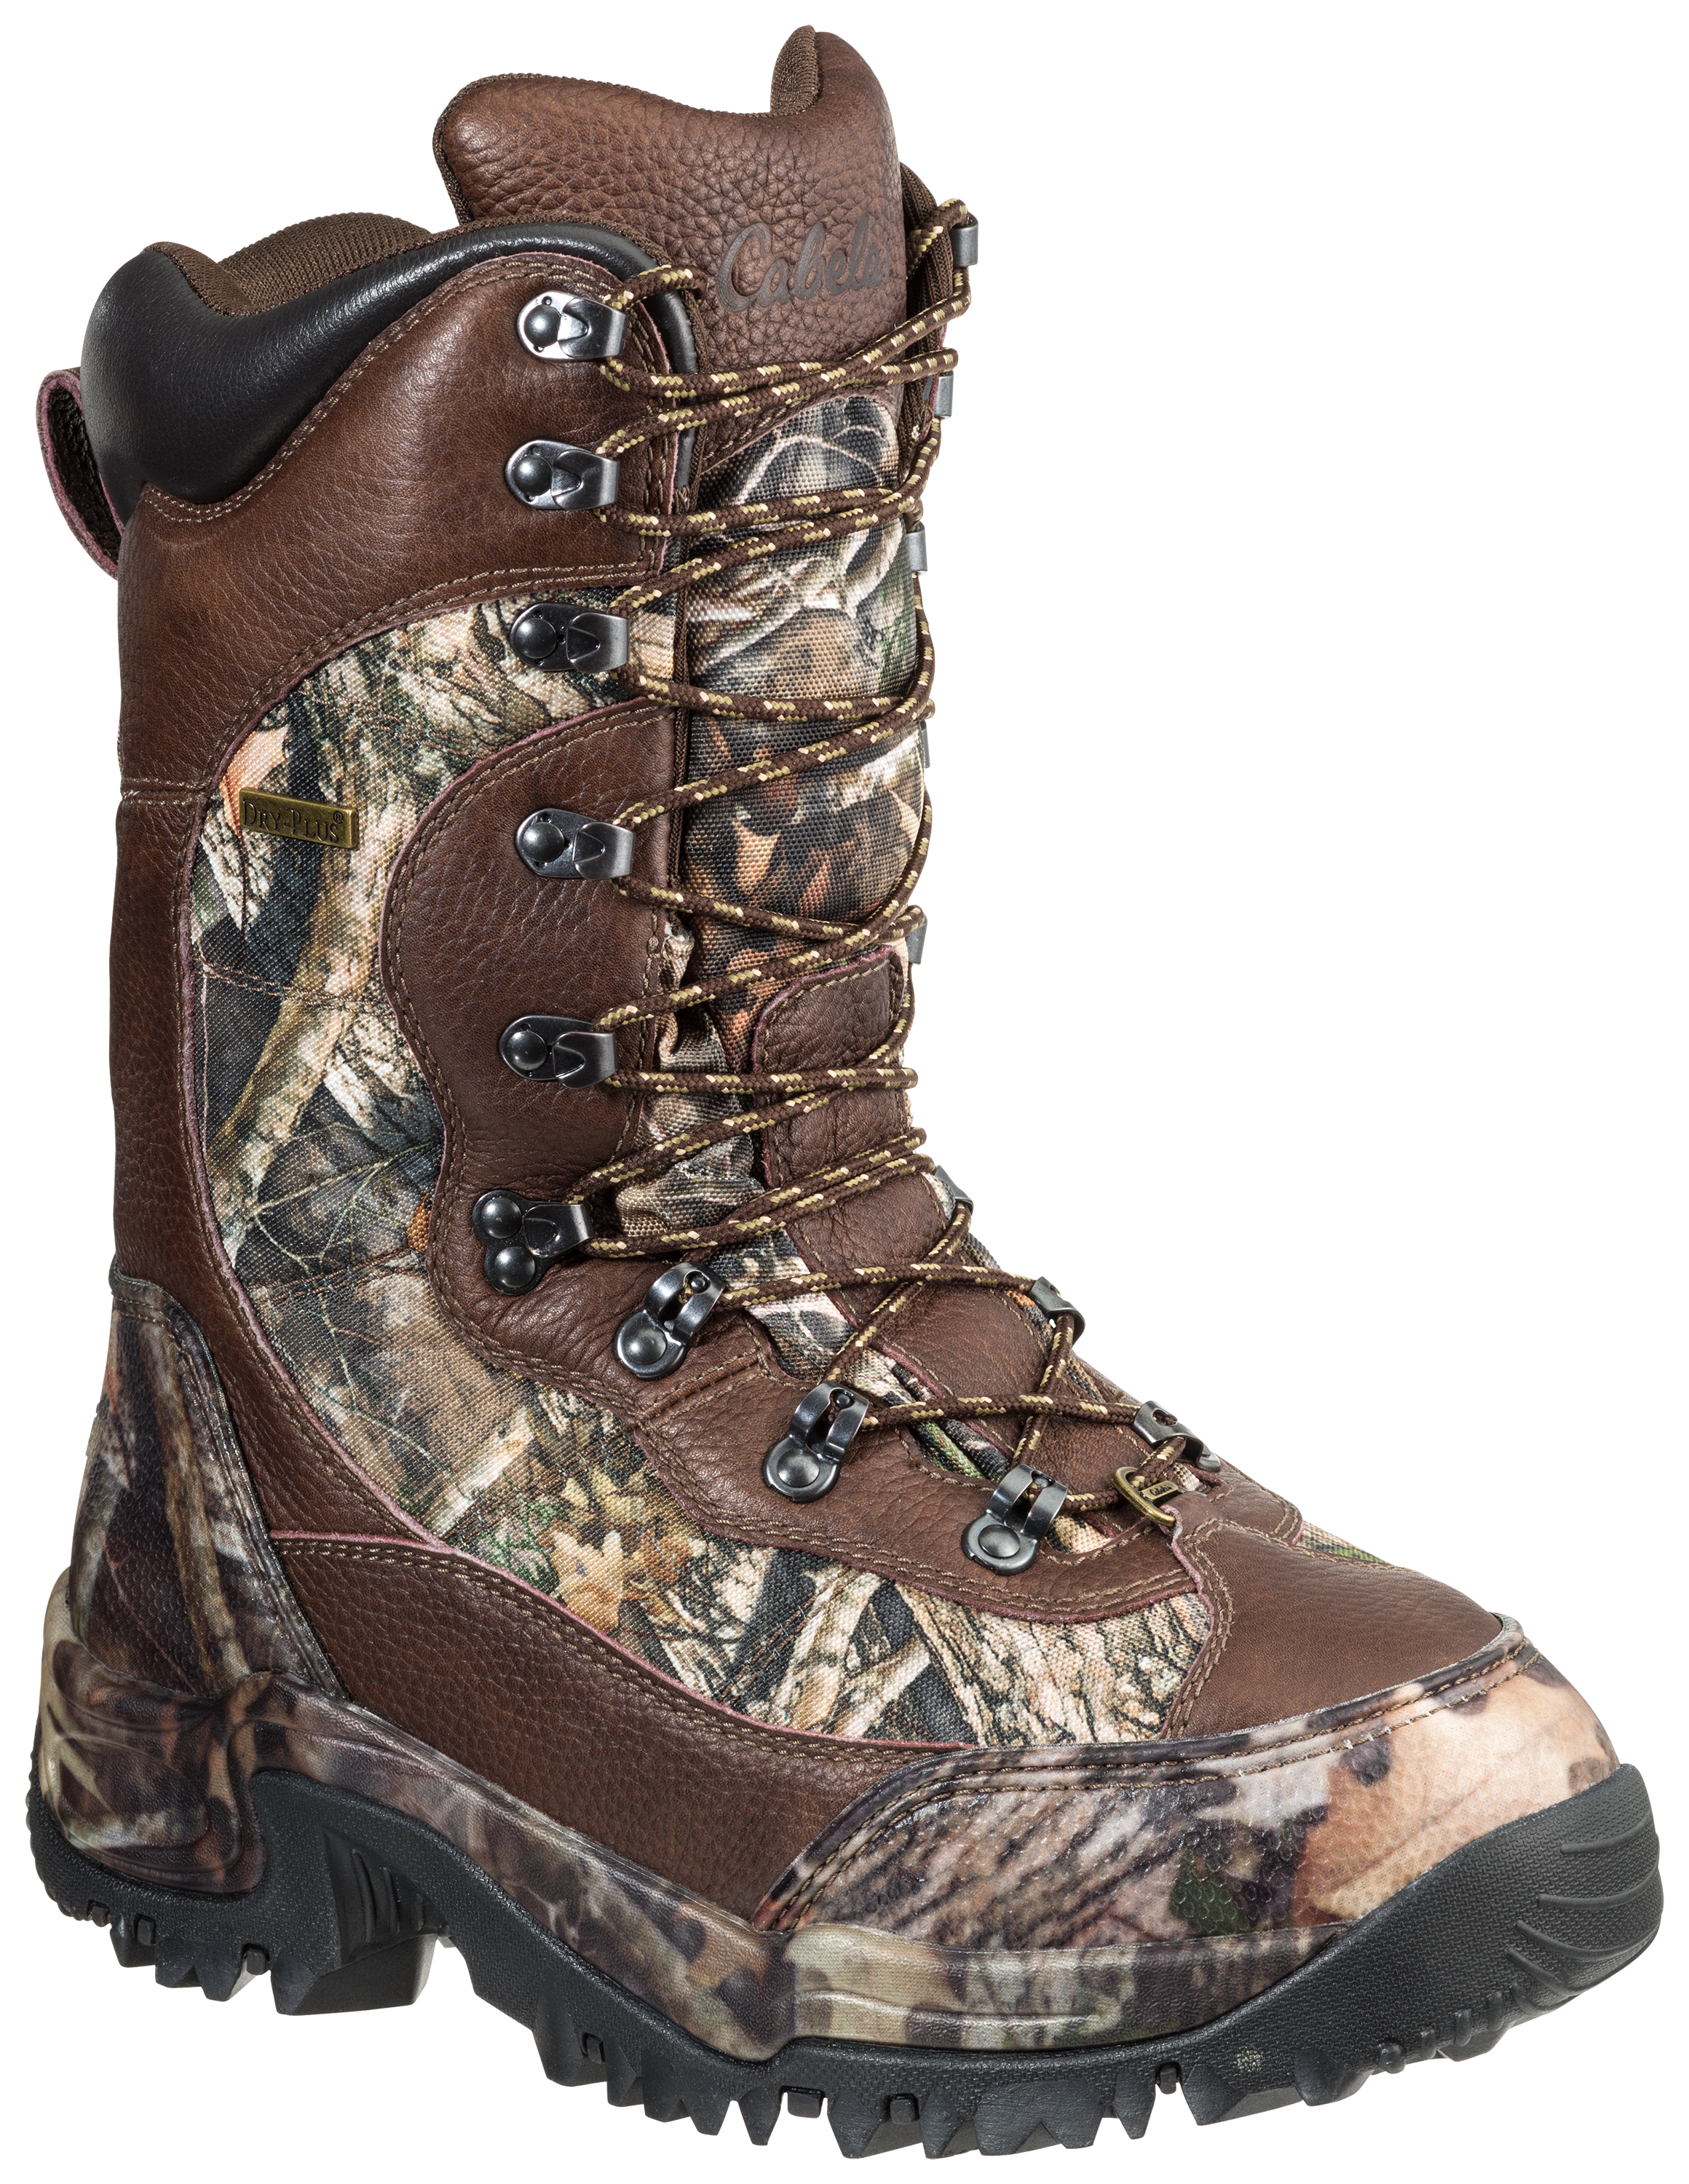 Cabela's Inferno Insulated Waterproof Hunting Boots for Men | Bass Pro ...